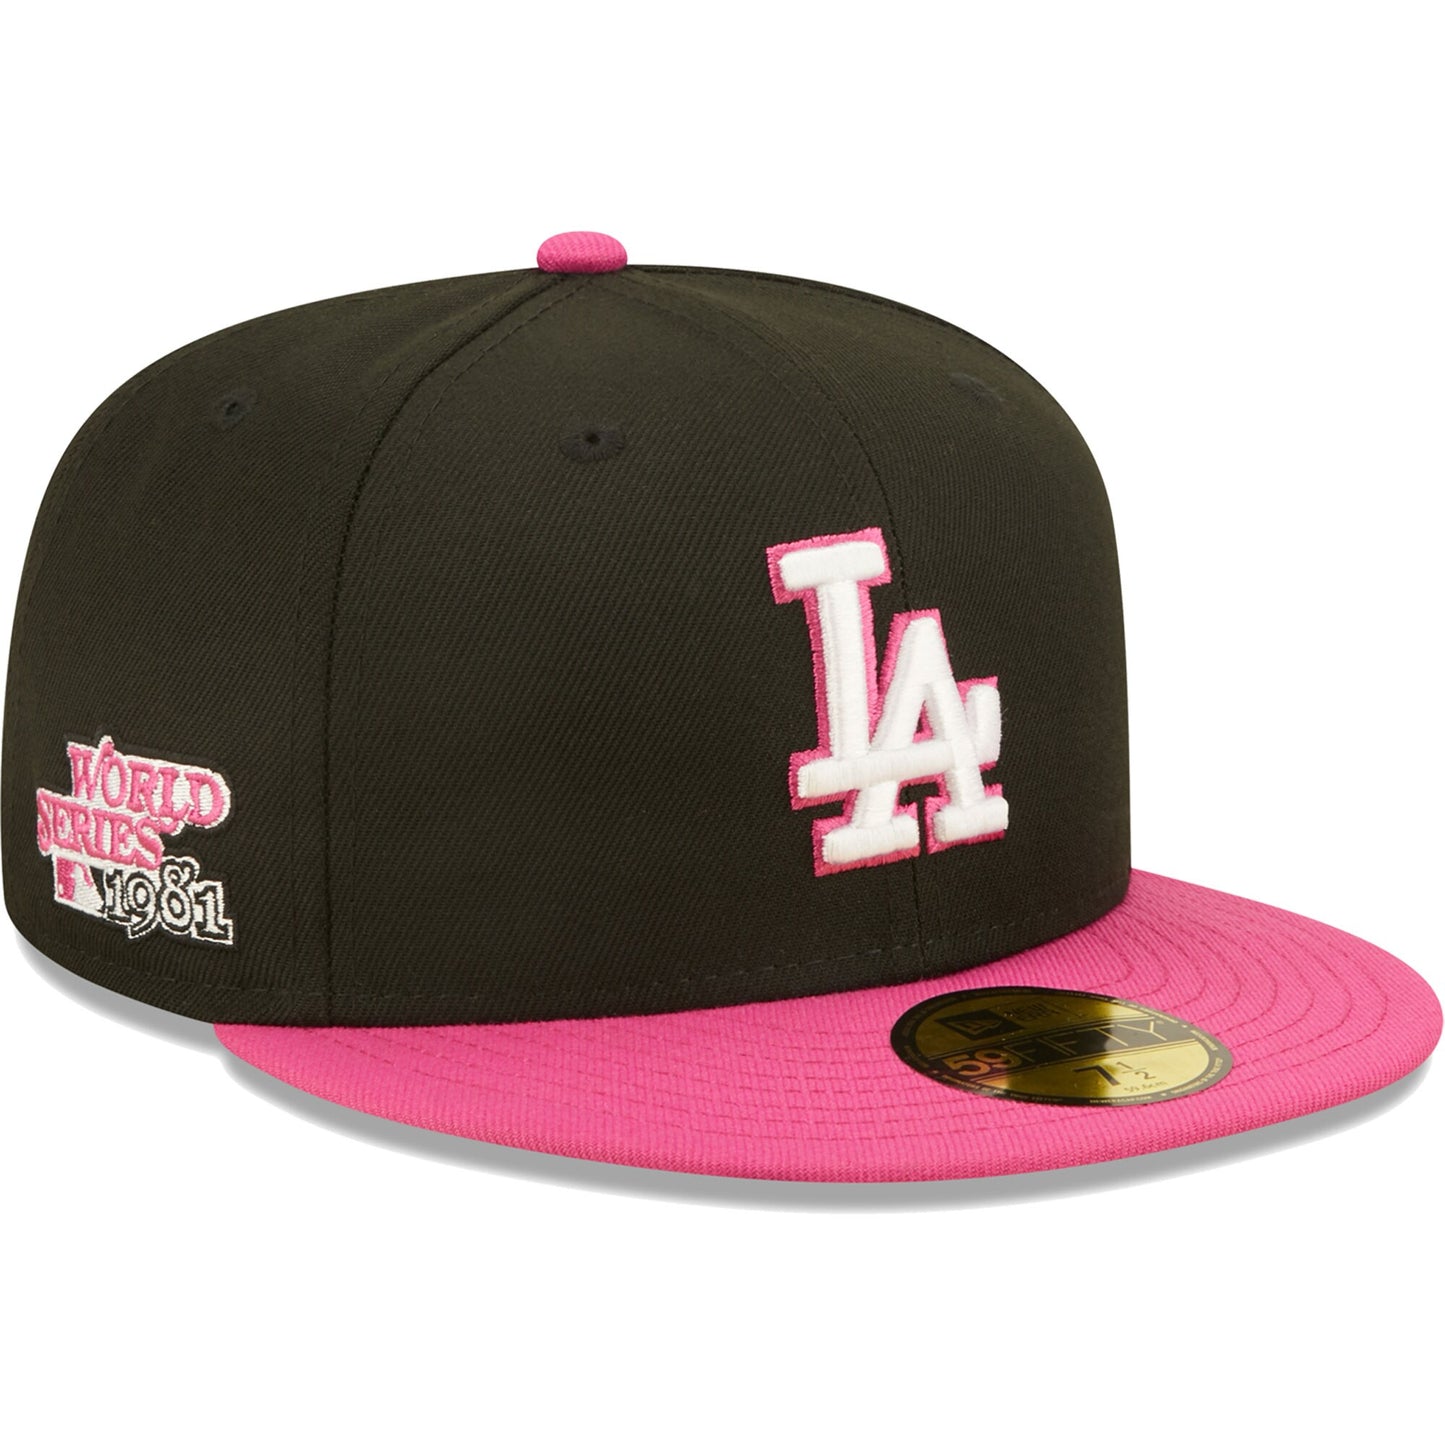 Los Angeles Dodgers New Era 1981 World Series Champions Passion 59FIFTY Fitted Hat - Black/Pink